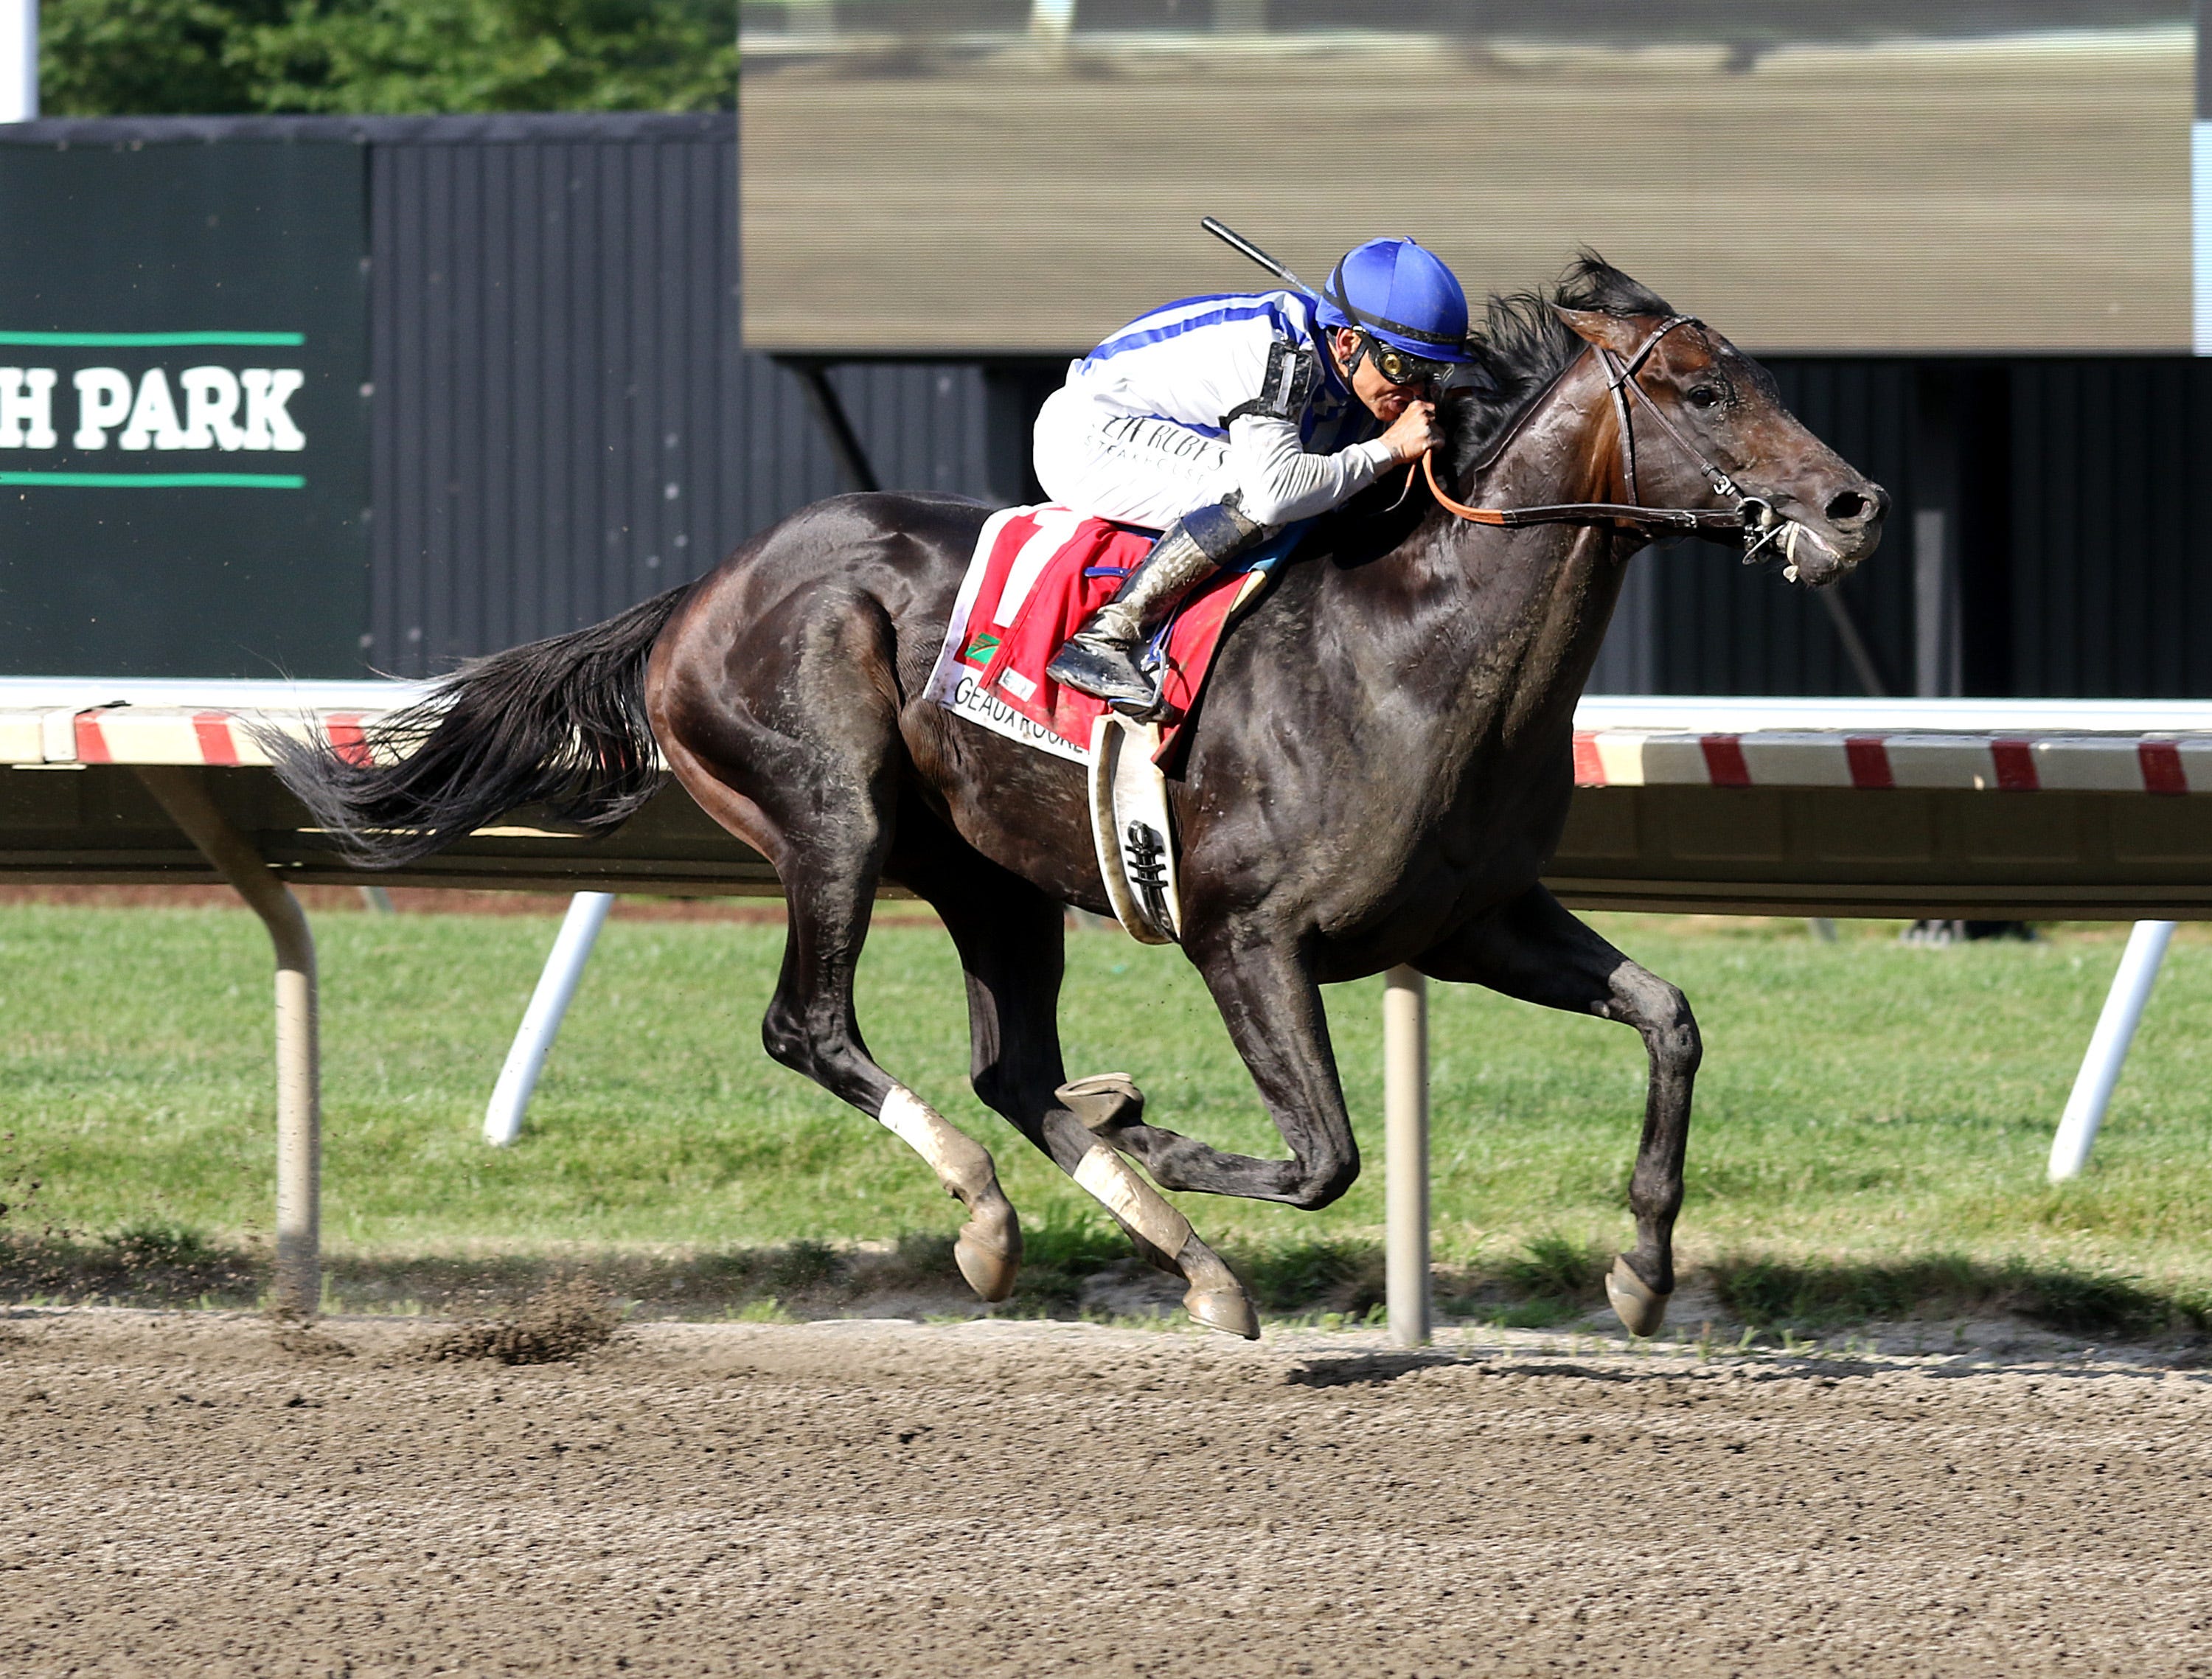 Geaux Rocket Ride tired after Haskell win, possible for Shared Belief